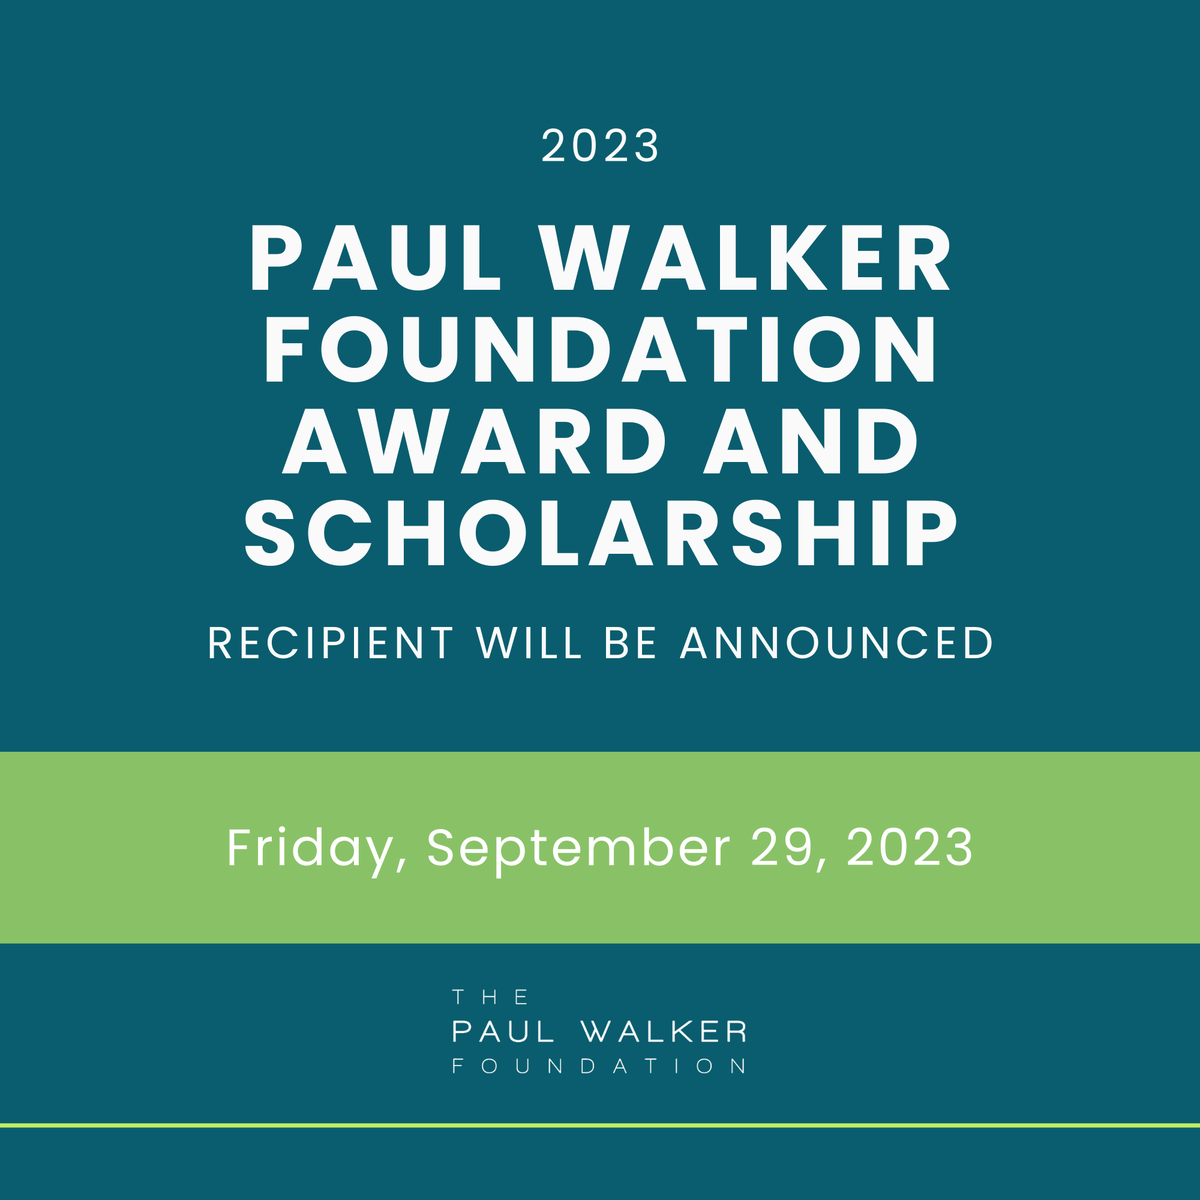 The 2023 recipient will be announced Friday, September 29, 2023. We invite you to continue supporting our future leaders by making a donation or pre-ordering The Exclusive 50th Birthday Tee today. Link in bio. #dogood #begood #paulwalkerfoundation